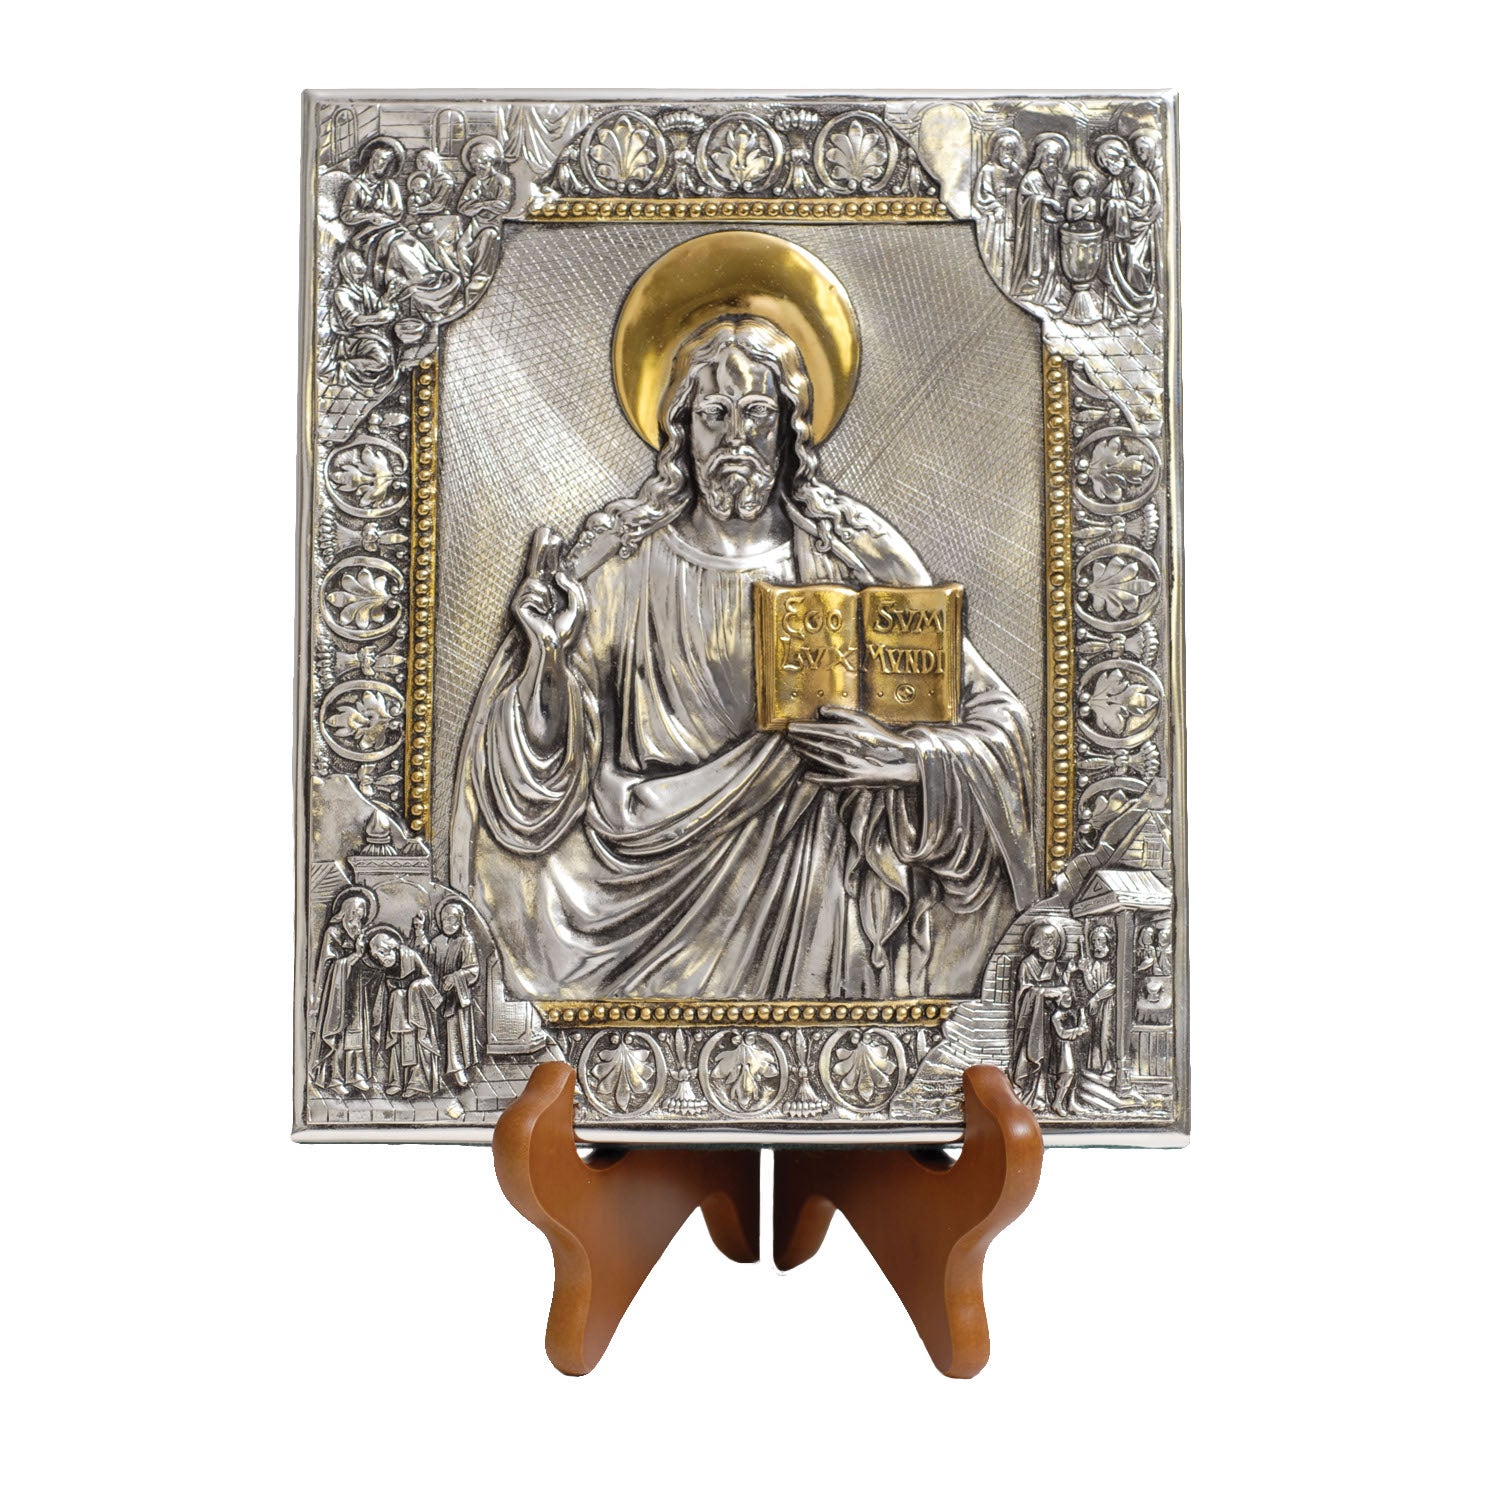 Silver Plated Icon - The Sacred Heart of Jesus, 7x8 inches